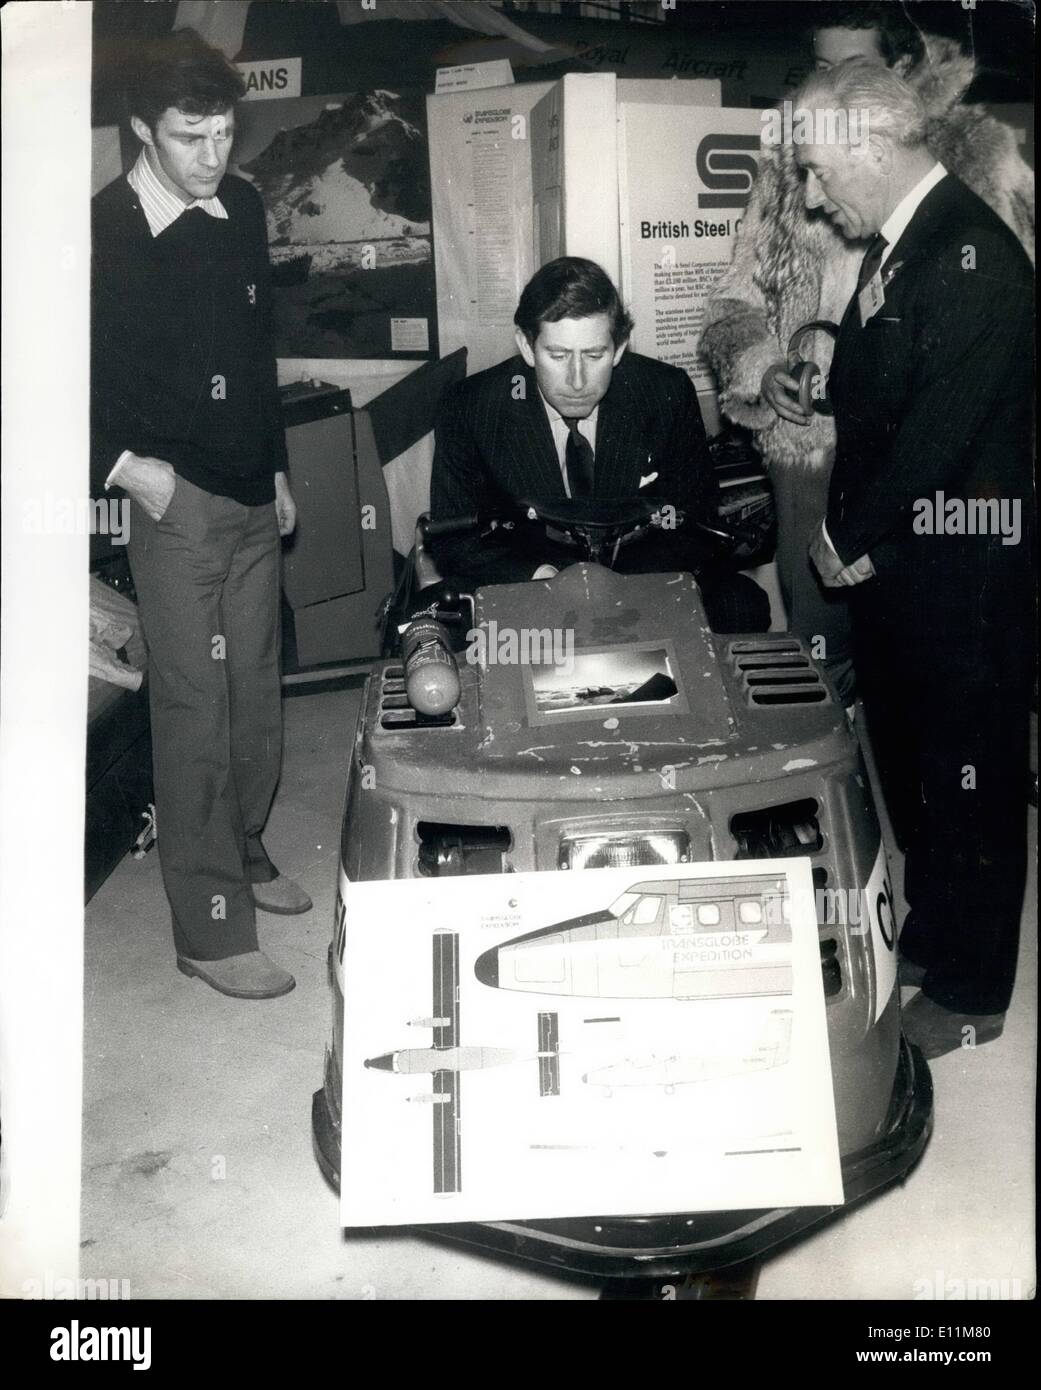 Feb. 02, 1979 - Prince Charles Launches First Attempt at Transpolar Trip. Man's first attempt to journey round the surface of the world by the Polar route was officially launched at Farnborough yesterday by Prince Charles. The 19 strong team of the Transglobe Expedition will set out in September. Photo Shows: Prince Charles seated in a Skido, an ice vehicle, when he launched the Polar route Transglobe Expedition in Farnborough, Hants, yesterday. Stock Photo